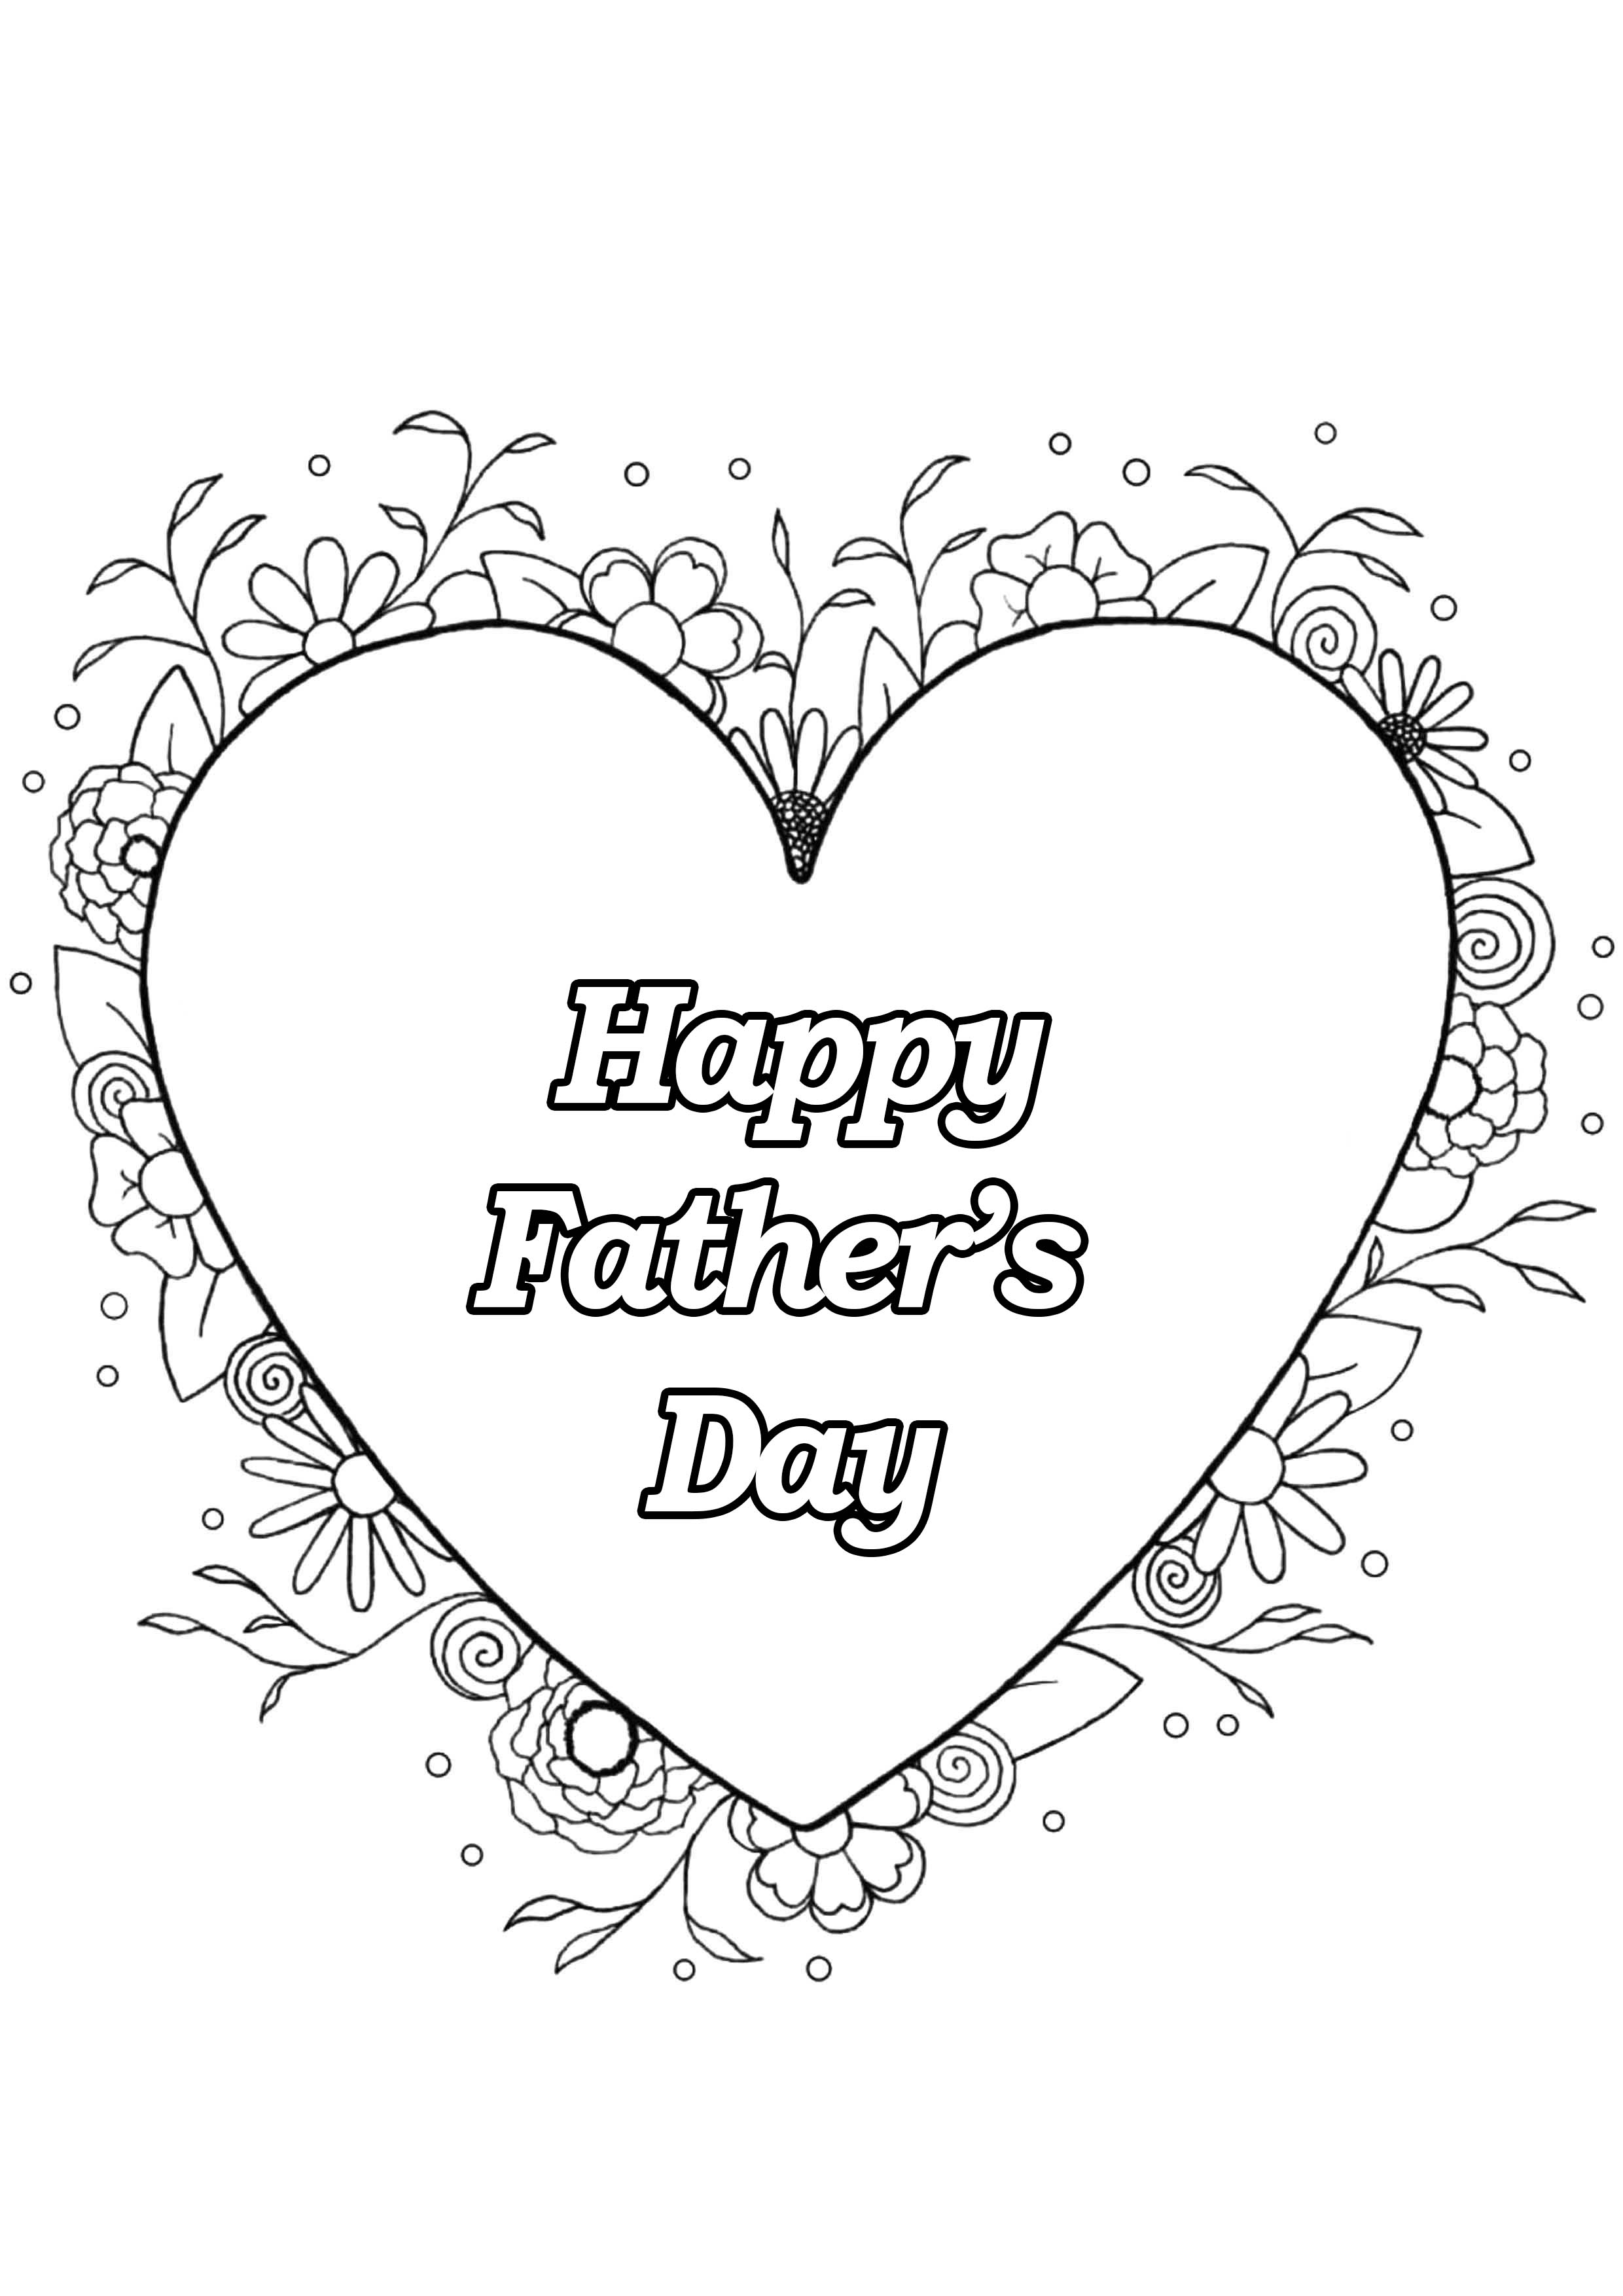 seeinglooking happy fathers day images with flowers